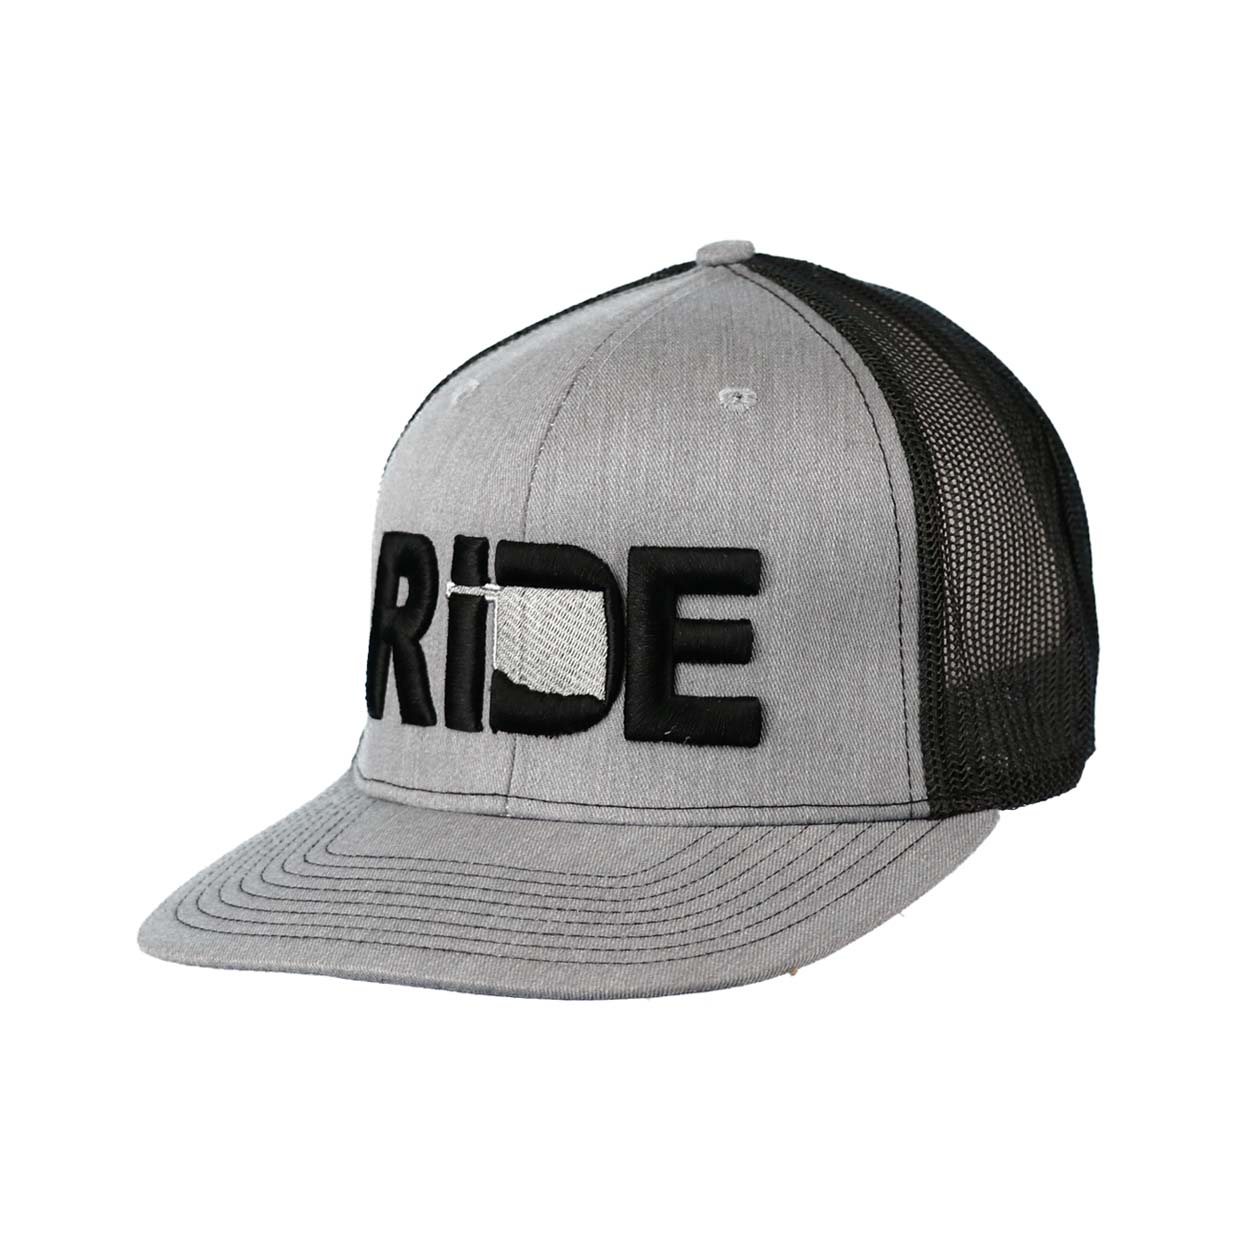 Ride Oklahoma Classic Pro 3D Puff Embroidered Snapback Trucker Hat Heather Gray/Black